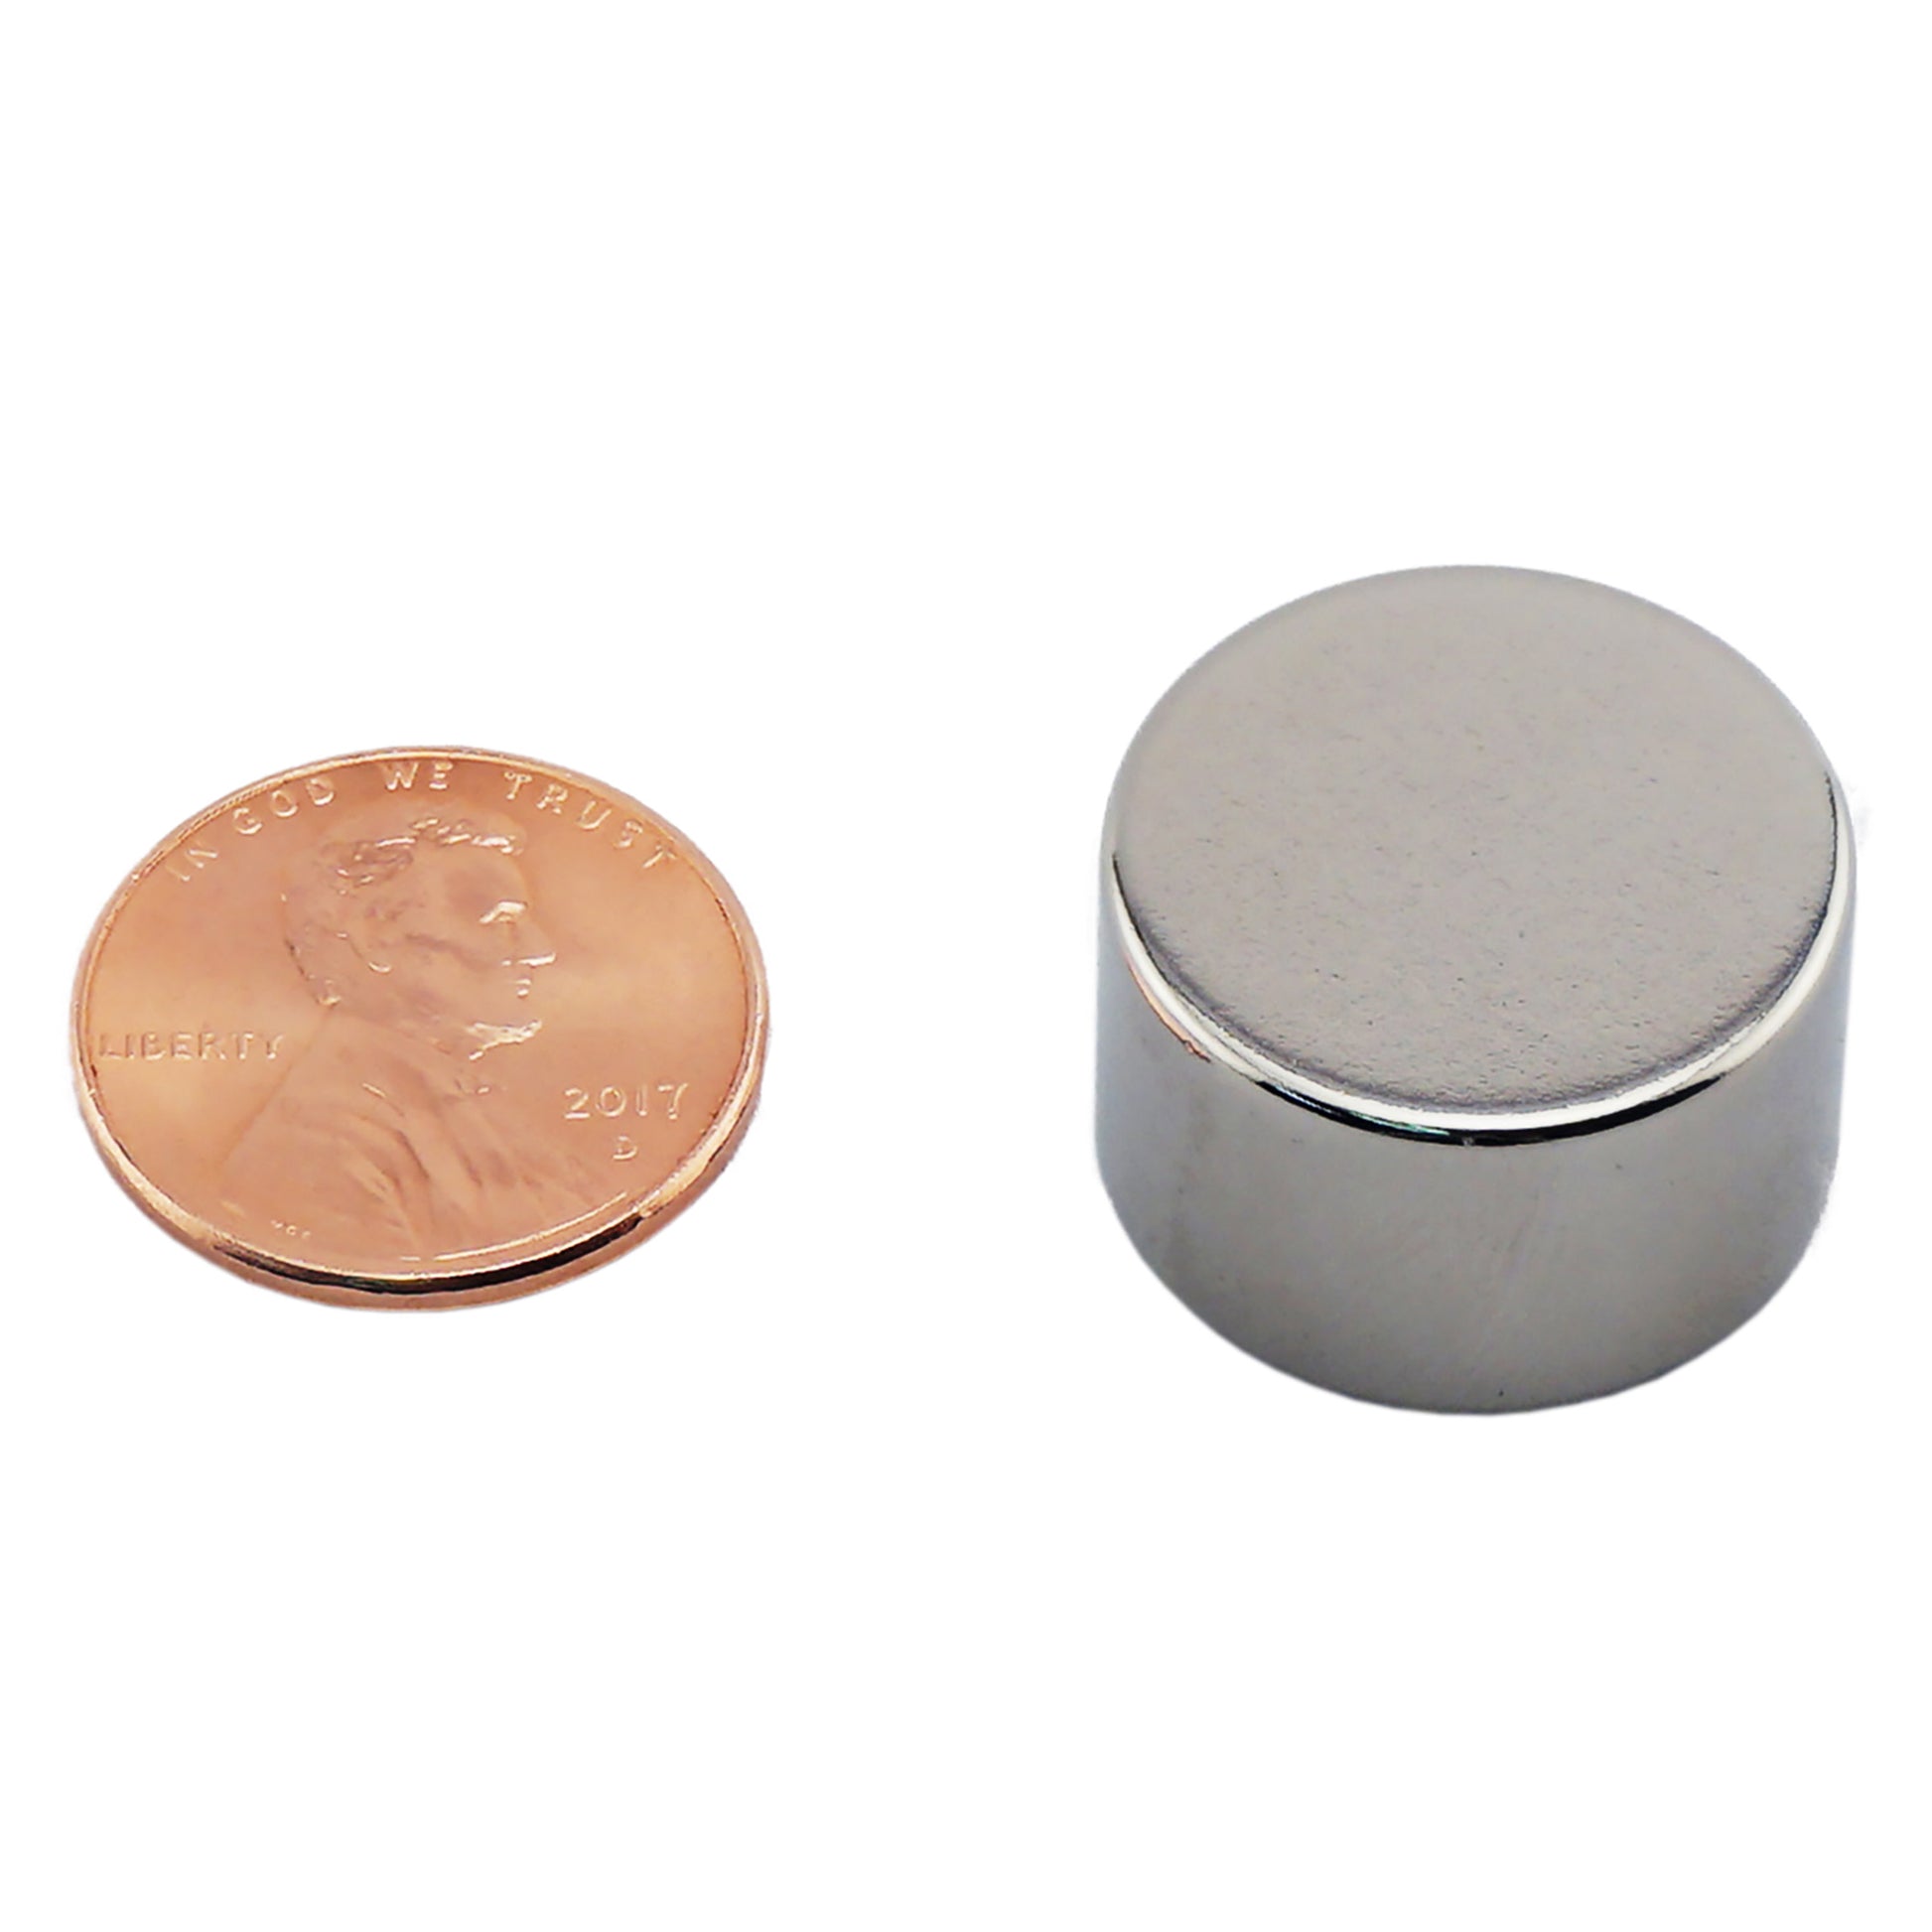 Load image into Gallery viewer, ND008102N Neodymium Disc Magnet - Compared to Penny for Size Reference